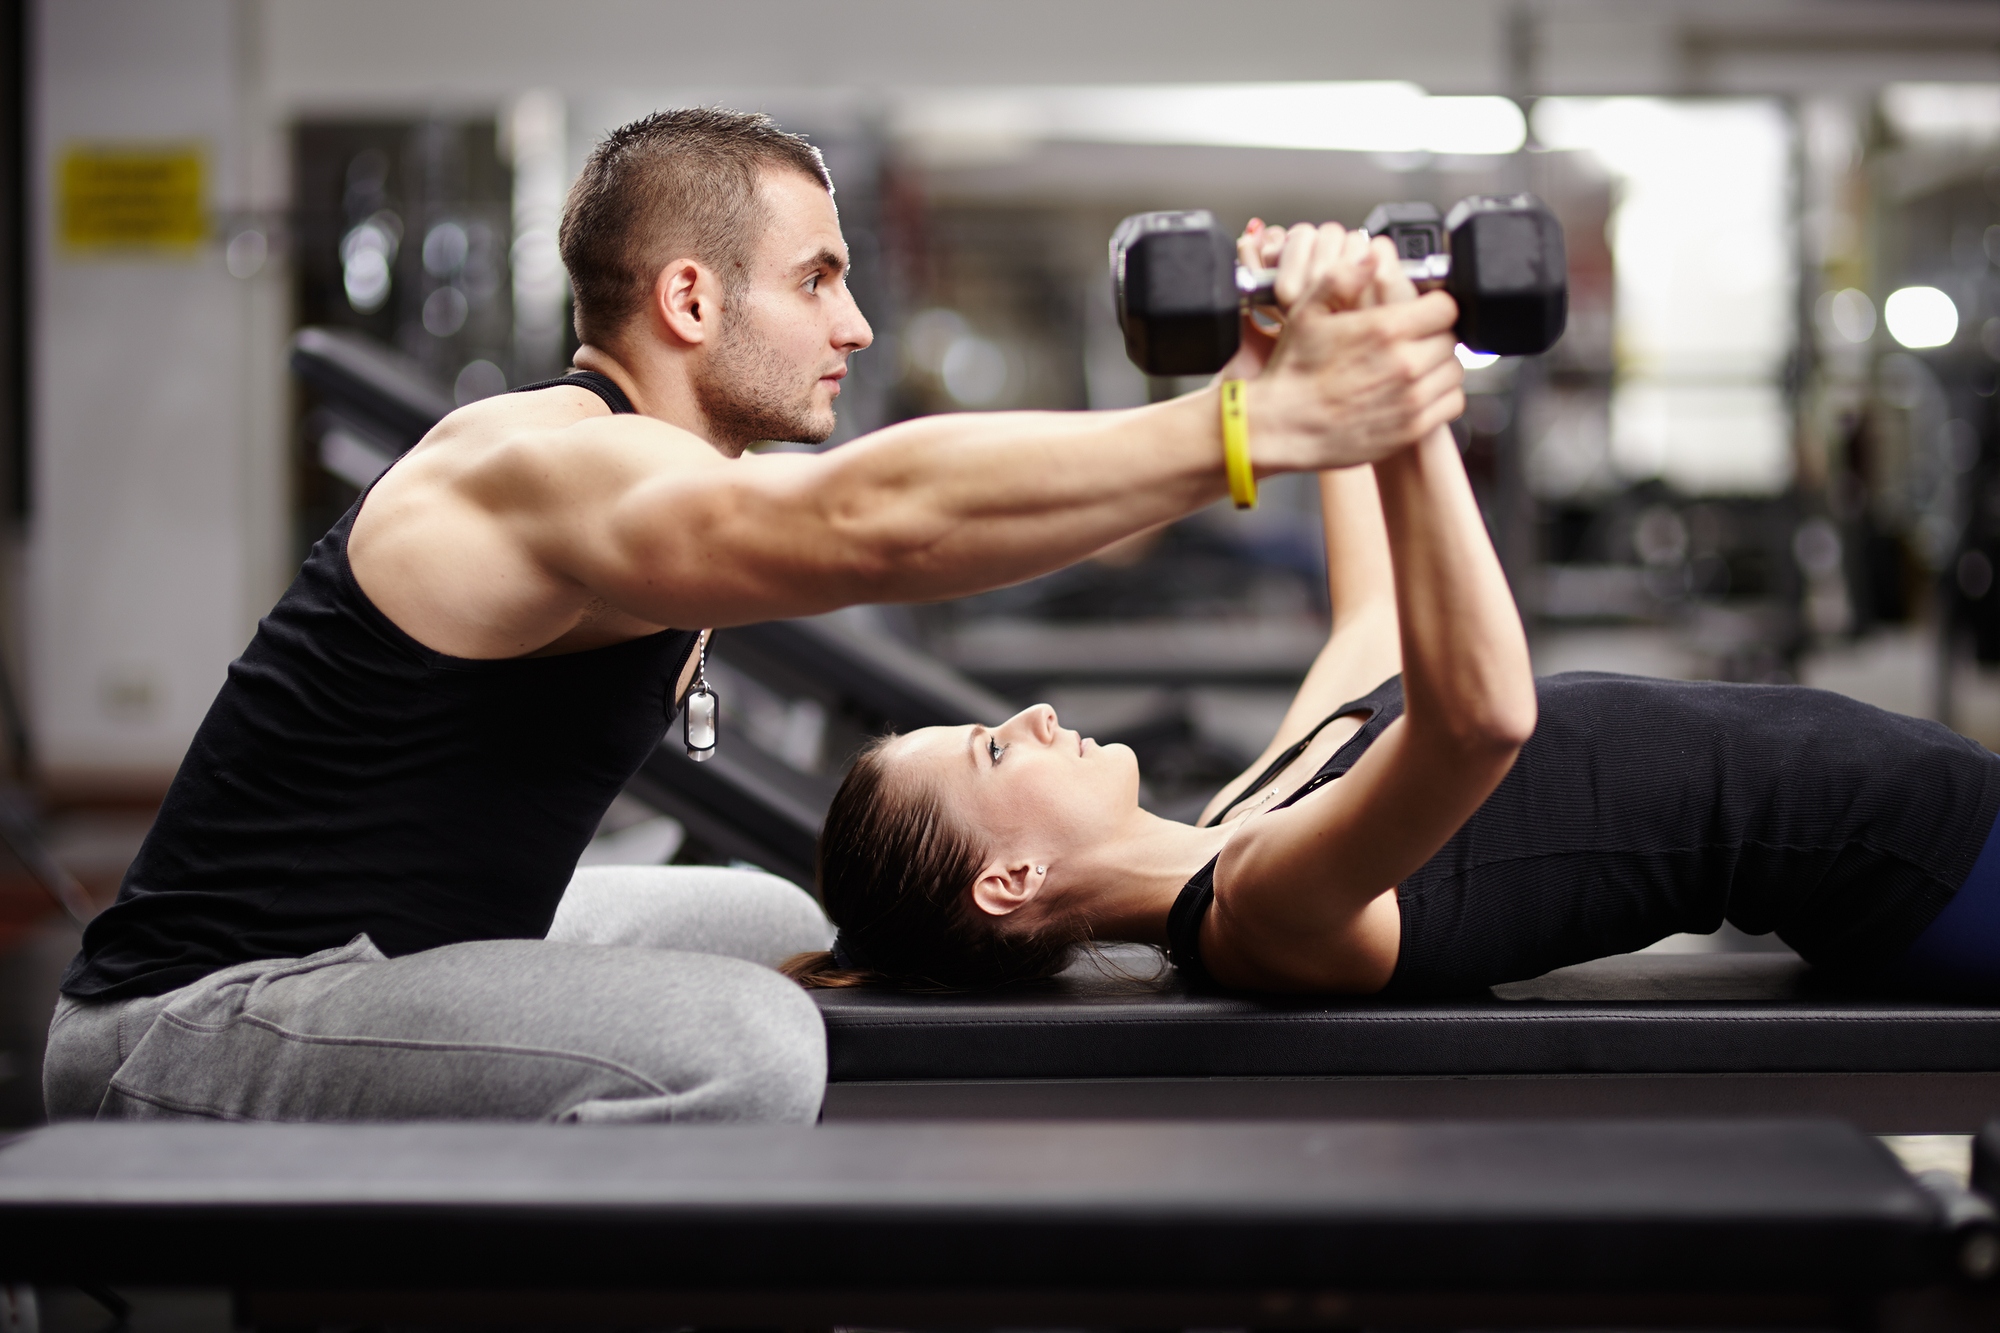 Personal trainer helping woman with weights: Do you need personal trainer insurance?